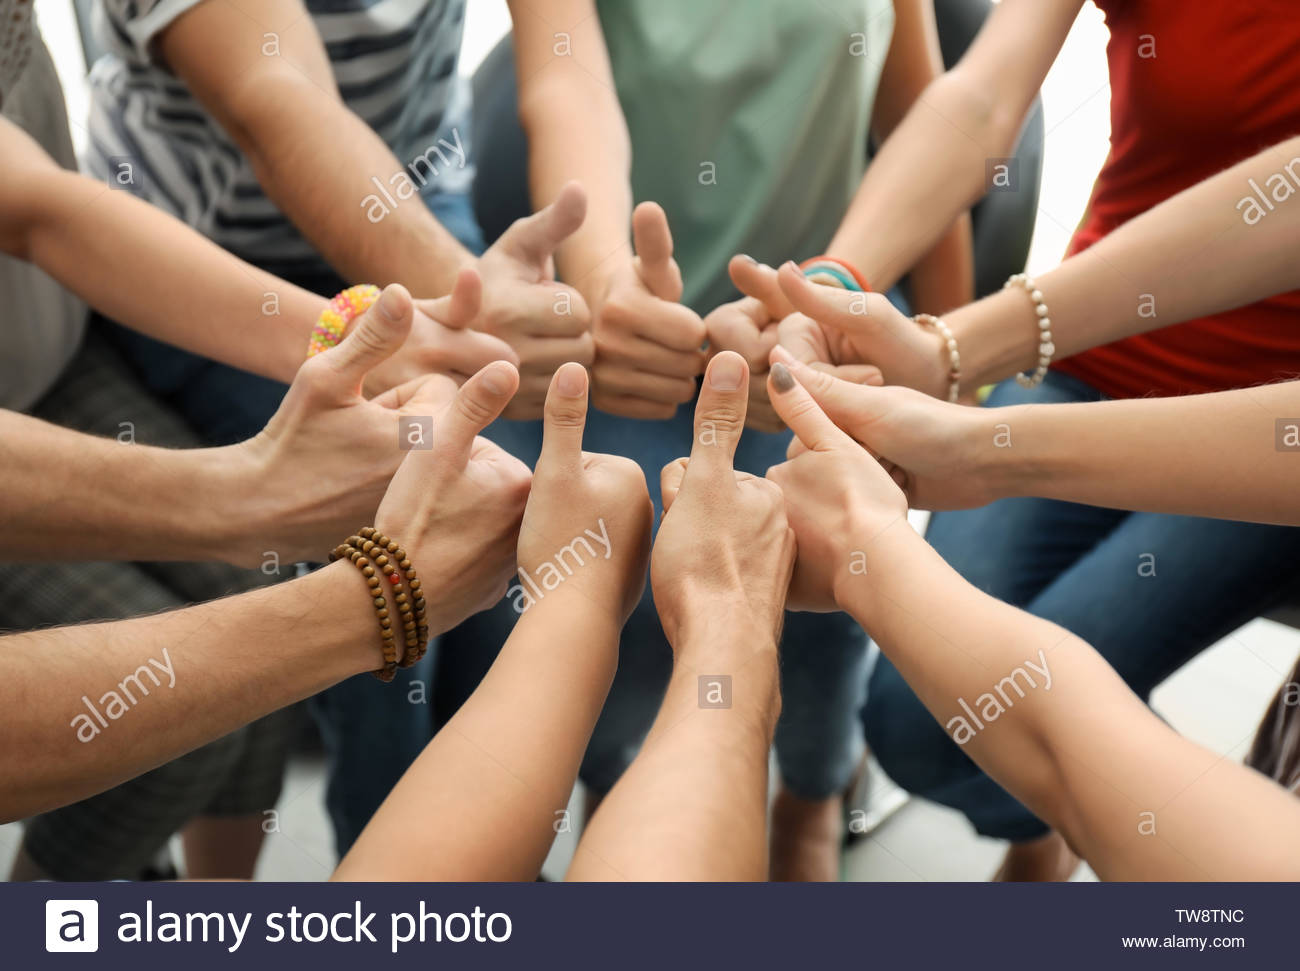 people putting hands together as symbol of unity tw8tnc